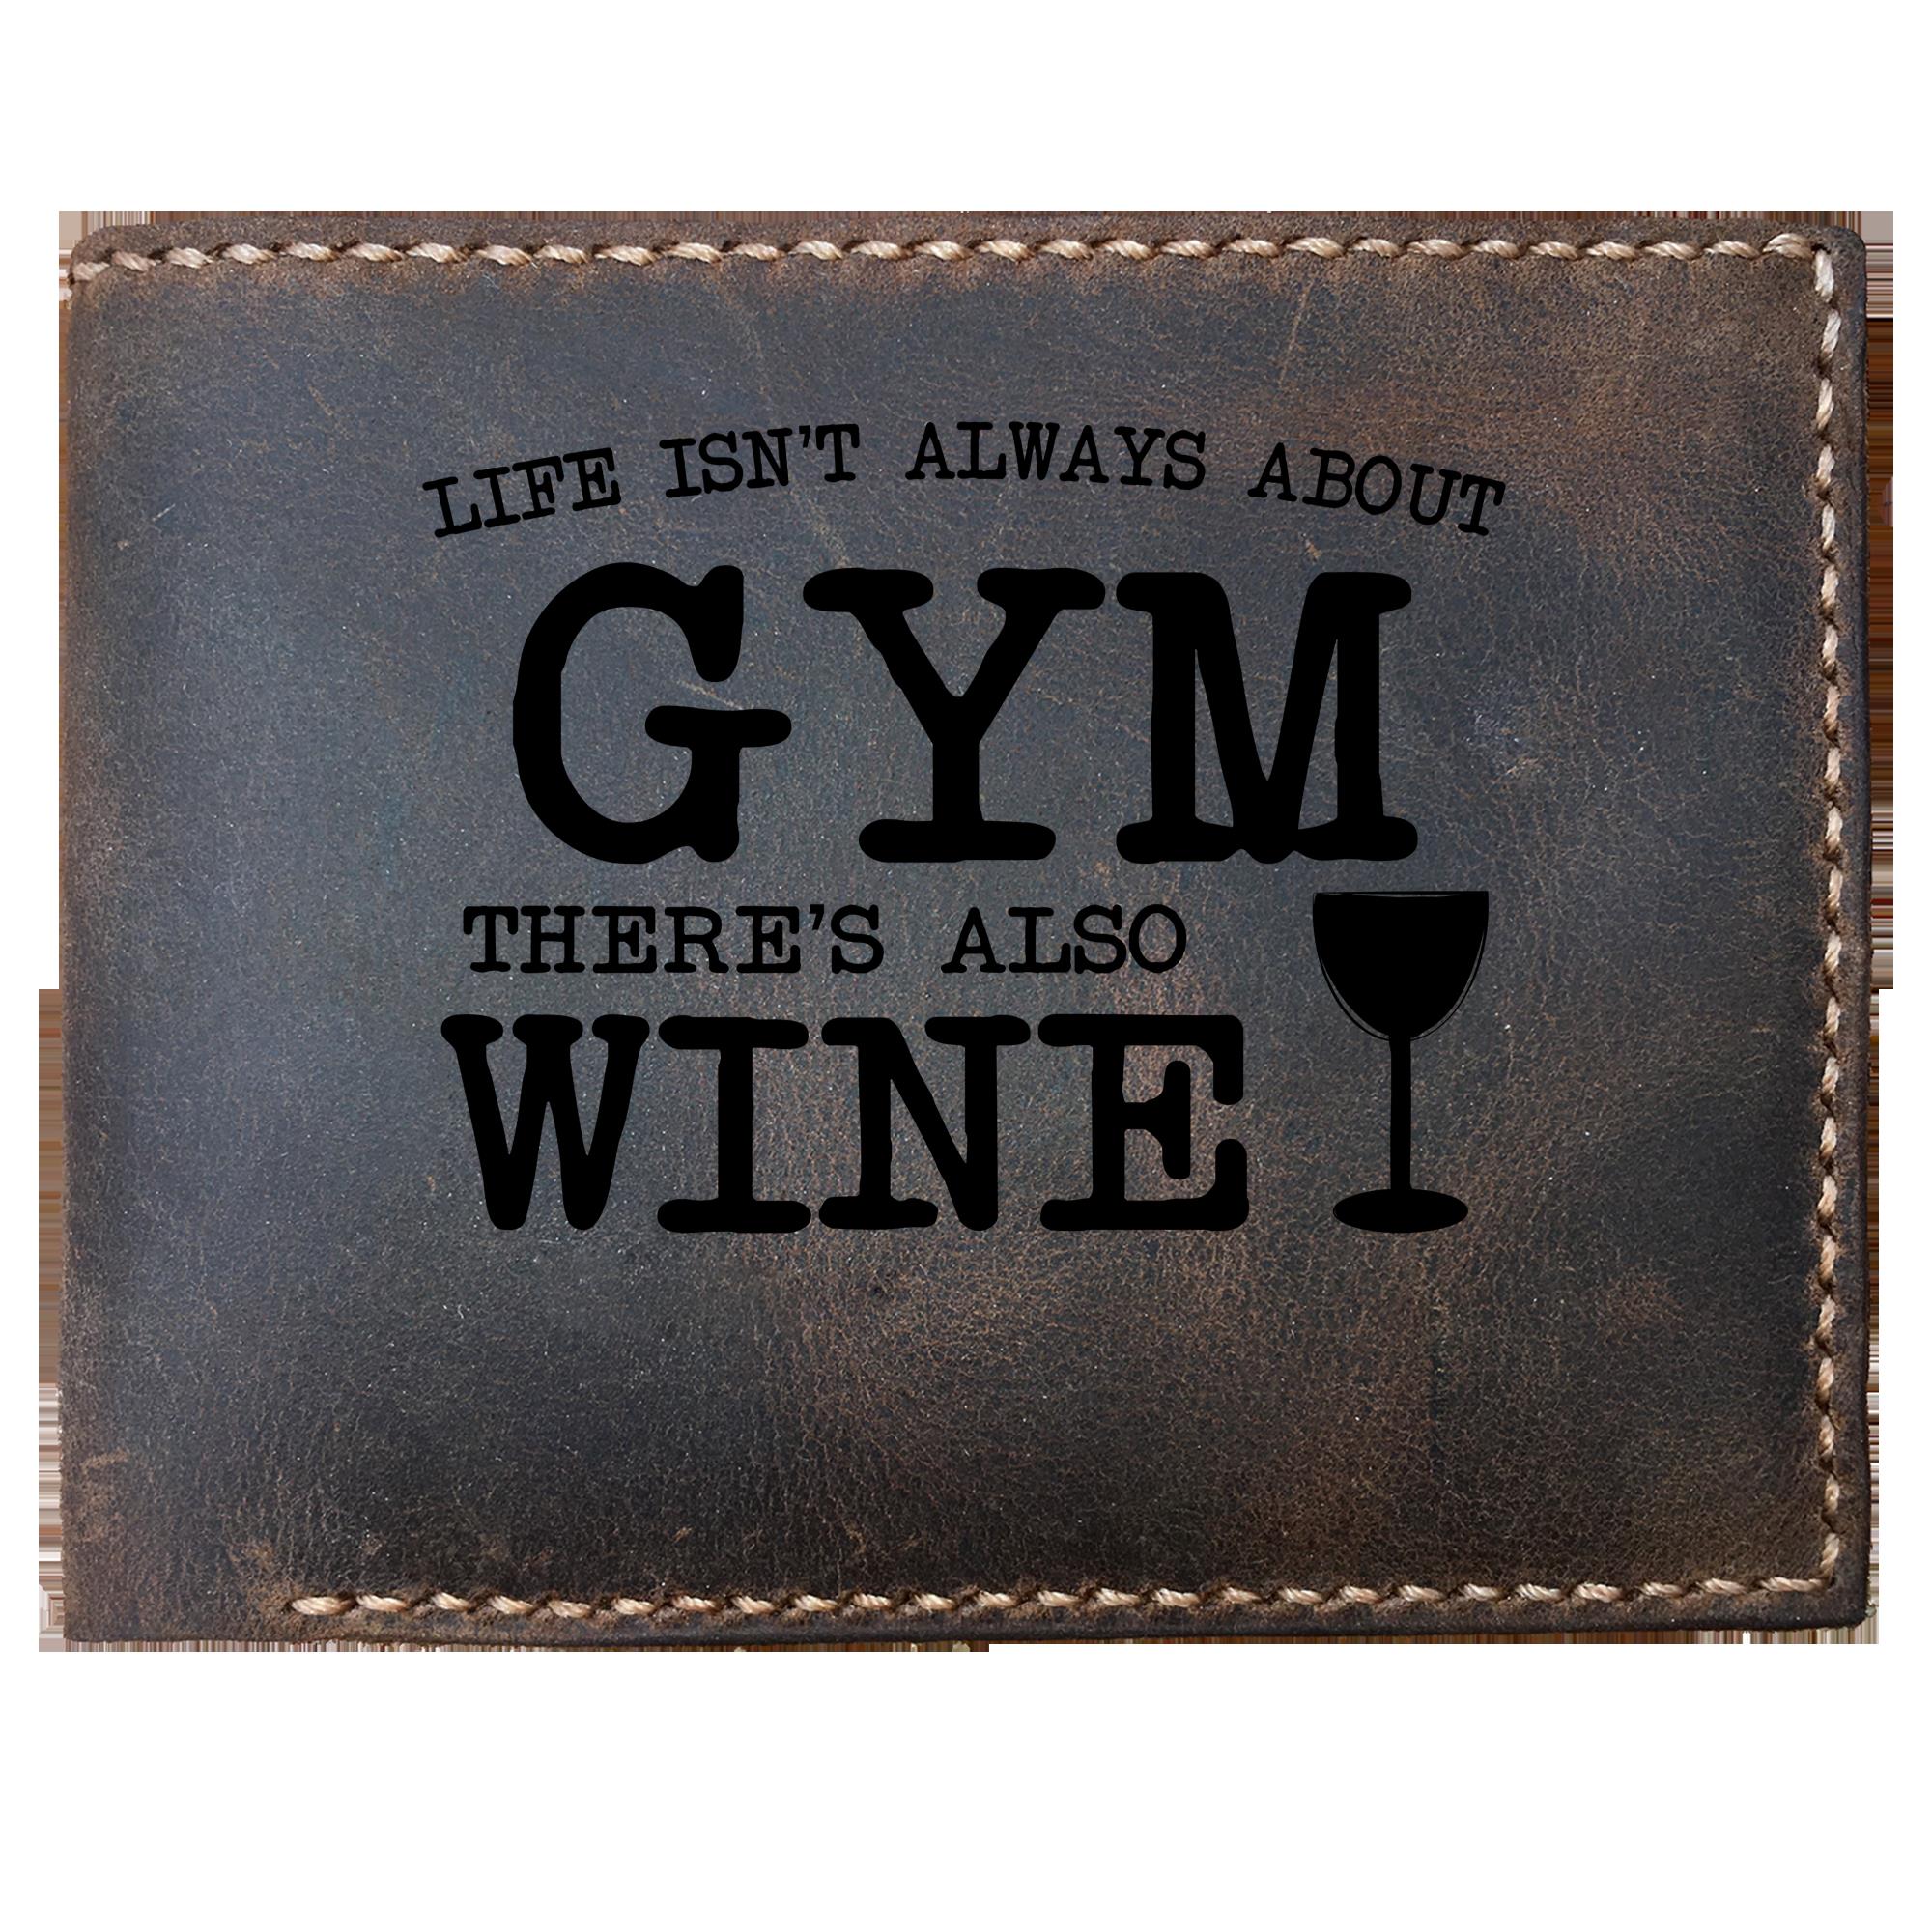 Skitongifts Funny Custom Laser Engraved Bifold Leather Wallet For Men, Wine Drinker Gym Funny Trainer Idea